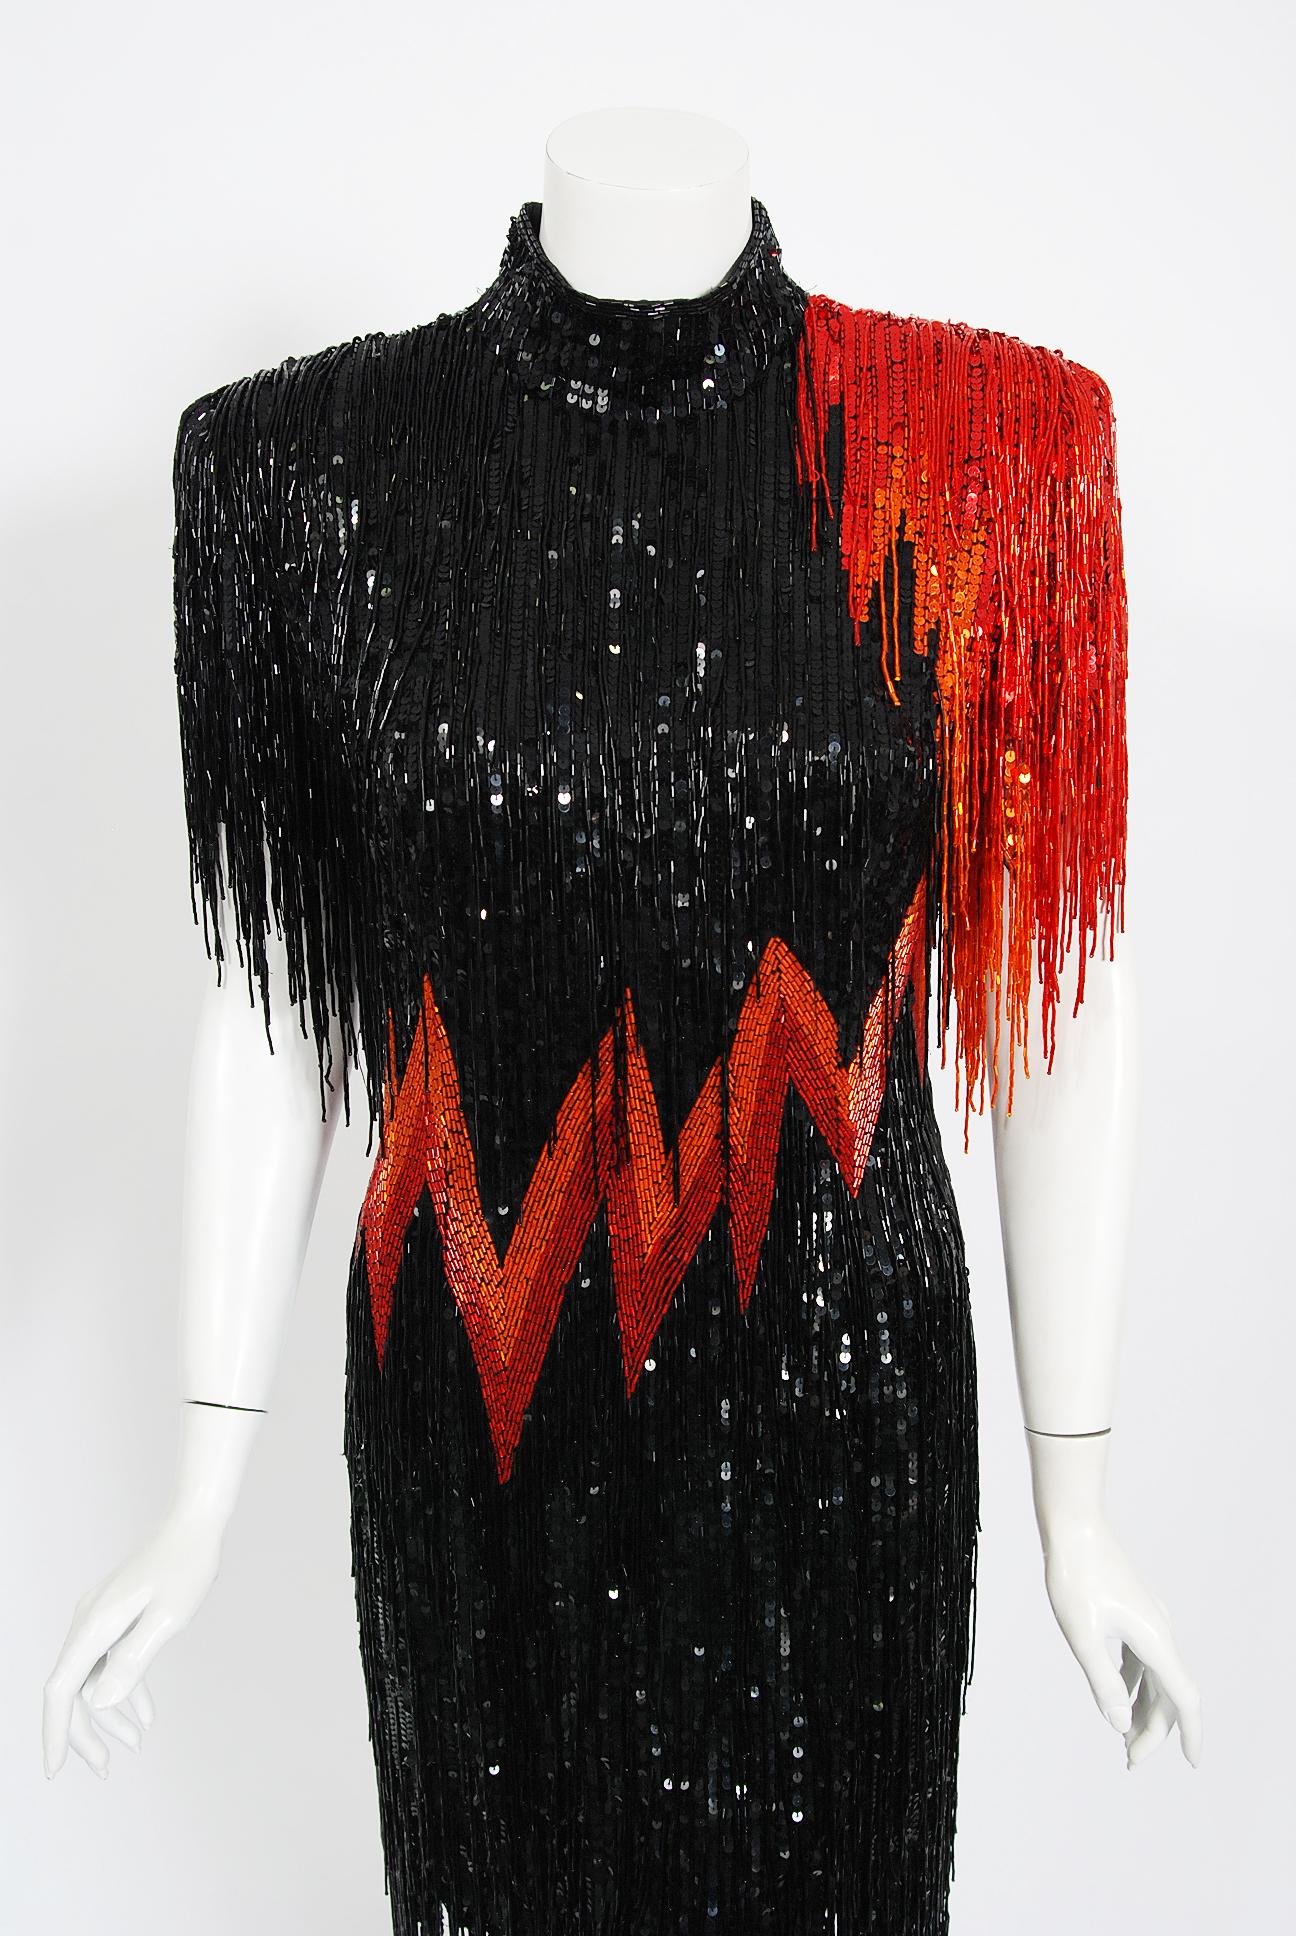 Fierce fully-beaded sequin Bob Mackie designer dress dating back to the early 1980's. Mackie began his career as a Hollywood costuming sketch artist, working for both Edith Head and Jean Louis. While working with designer Ray Aghayan, Mackie soon